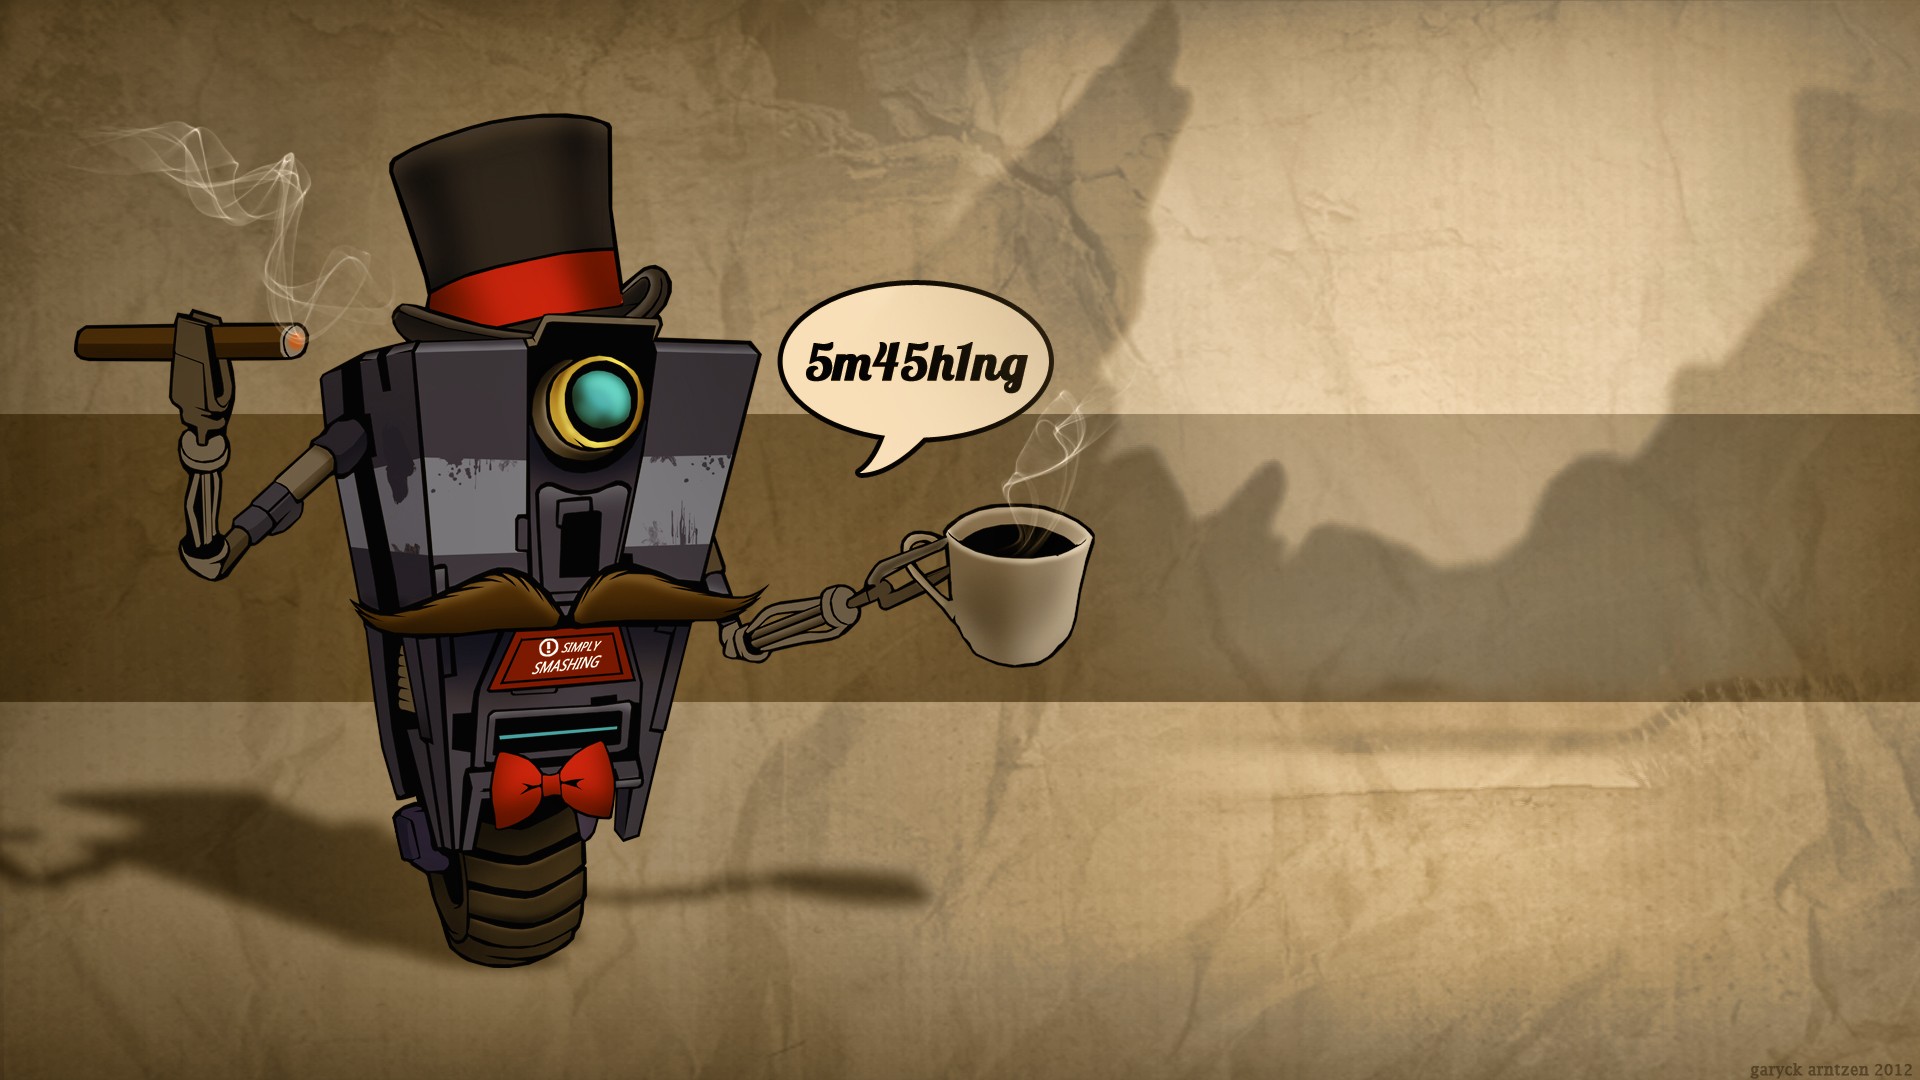 wallpaper claptrap smashing simply borderlands wallpapers images